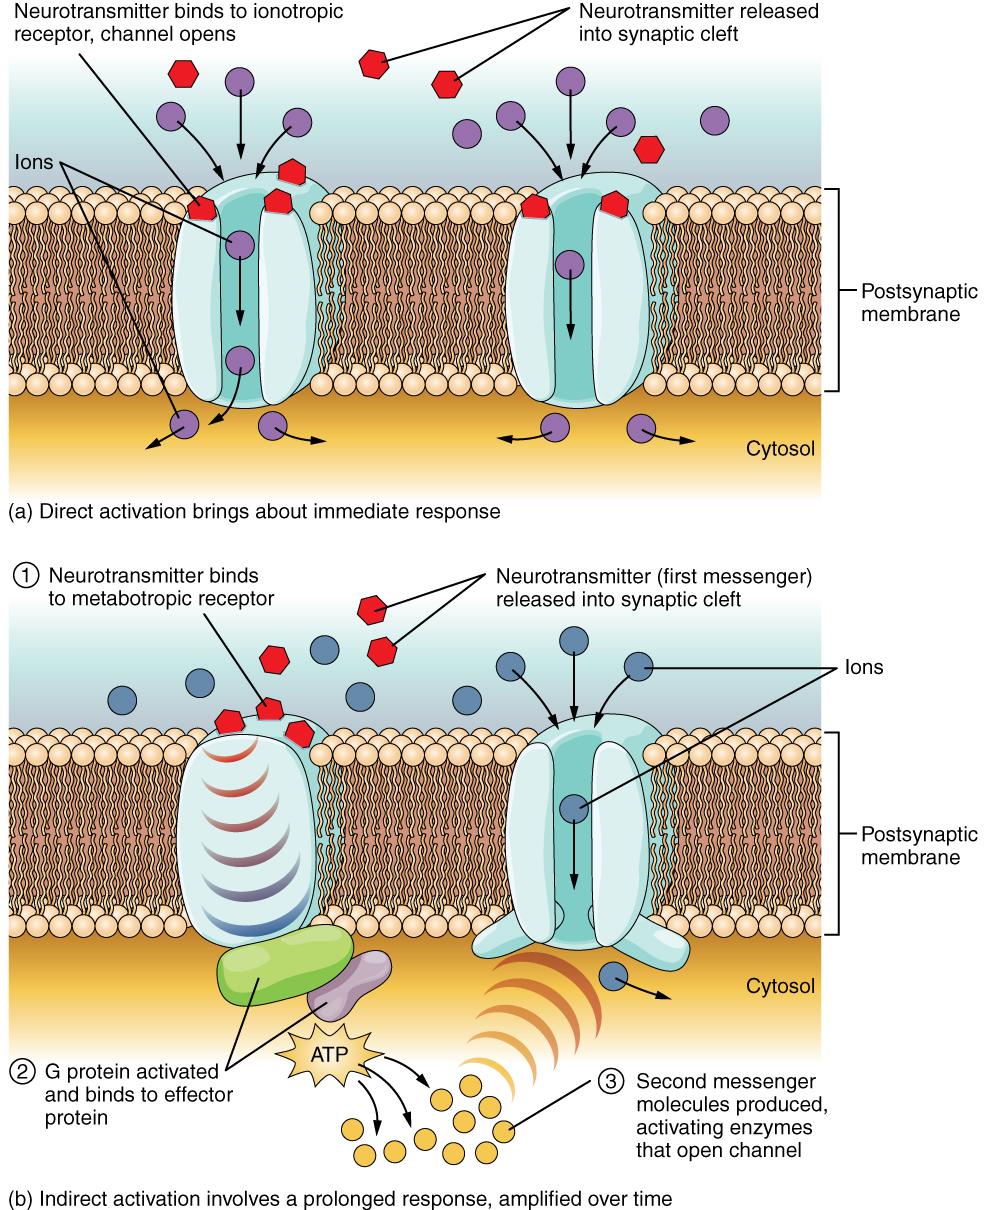 Receptor Types (a) An ionotropic receptor is a channel that opens when the neurotransmitter binds to it.